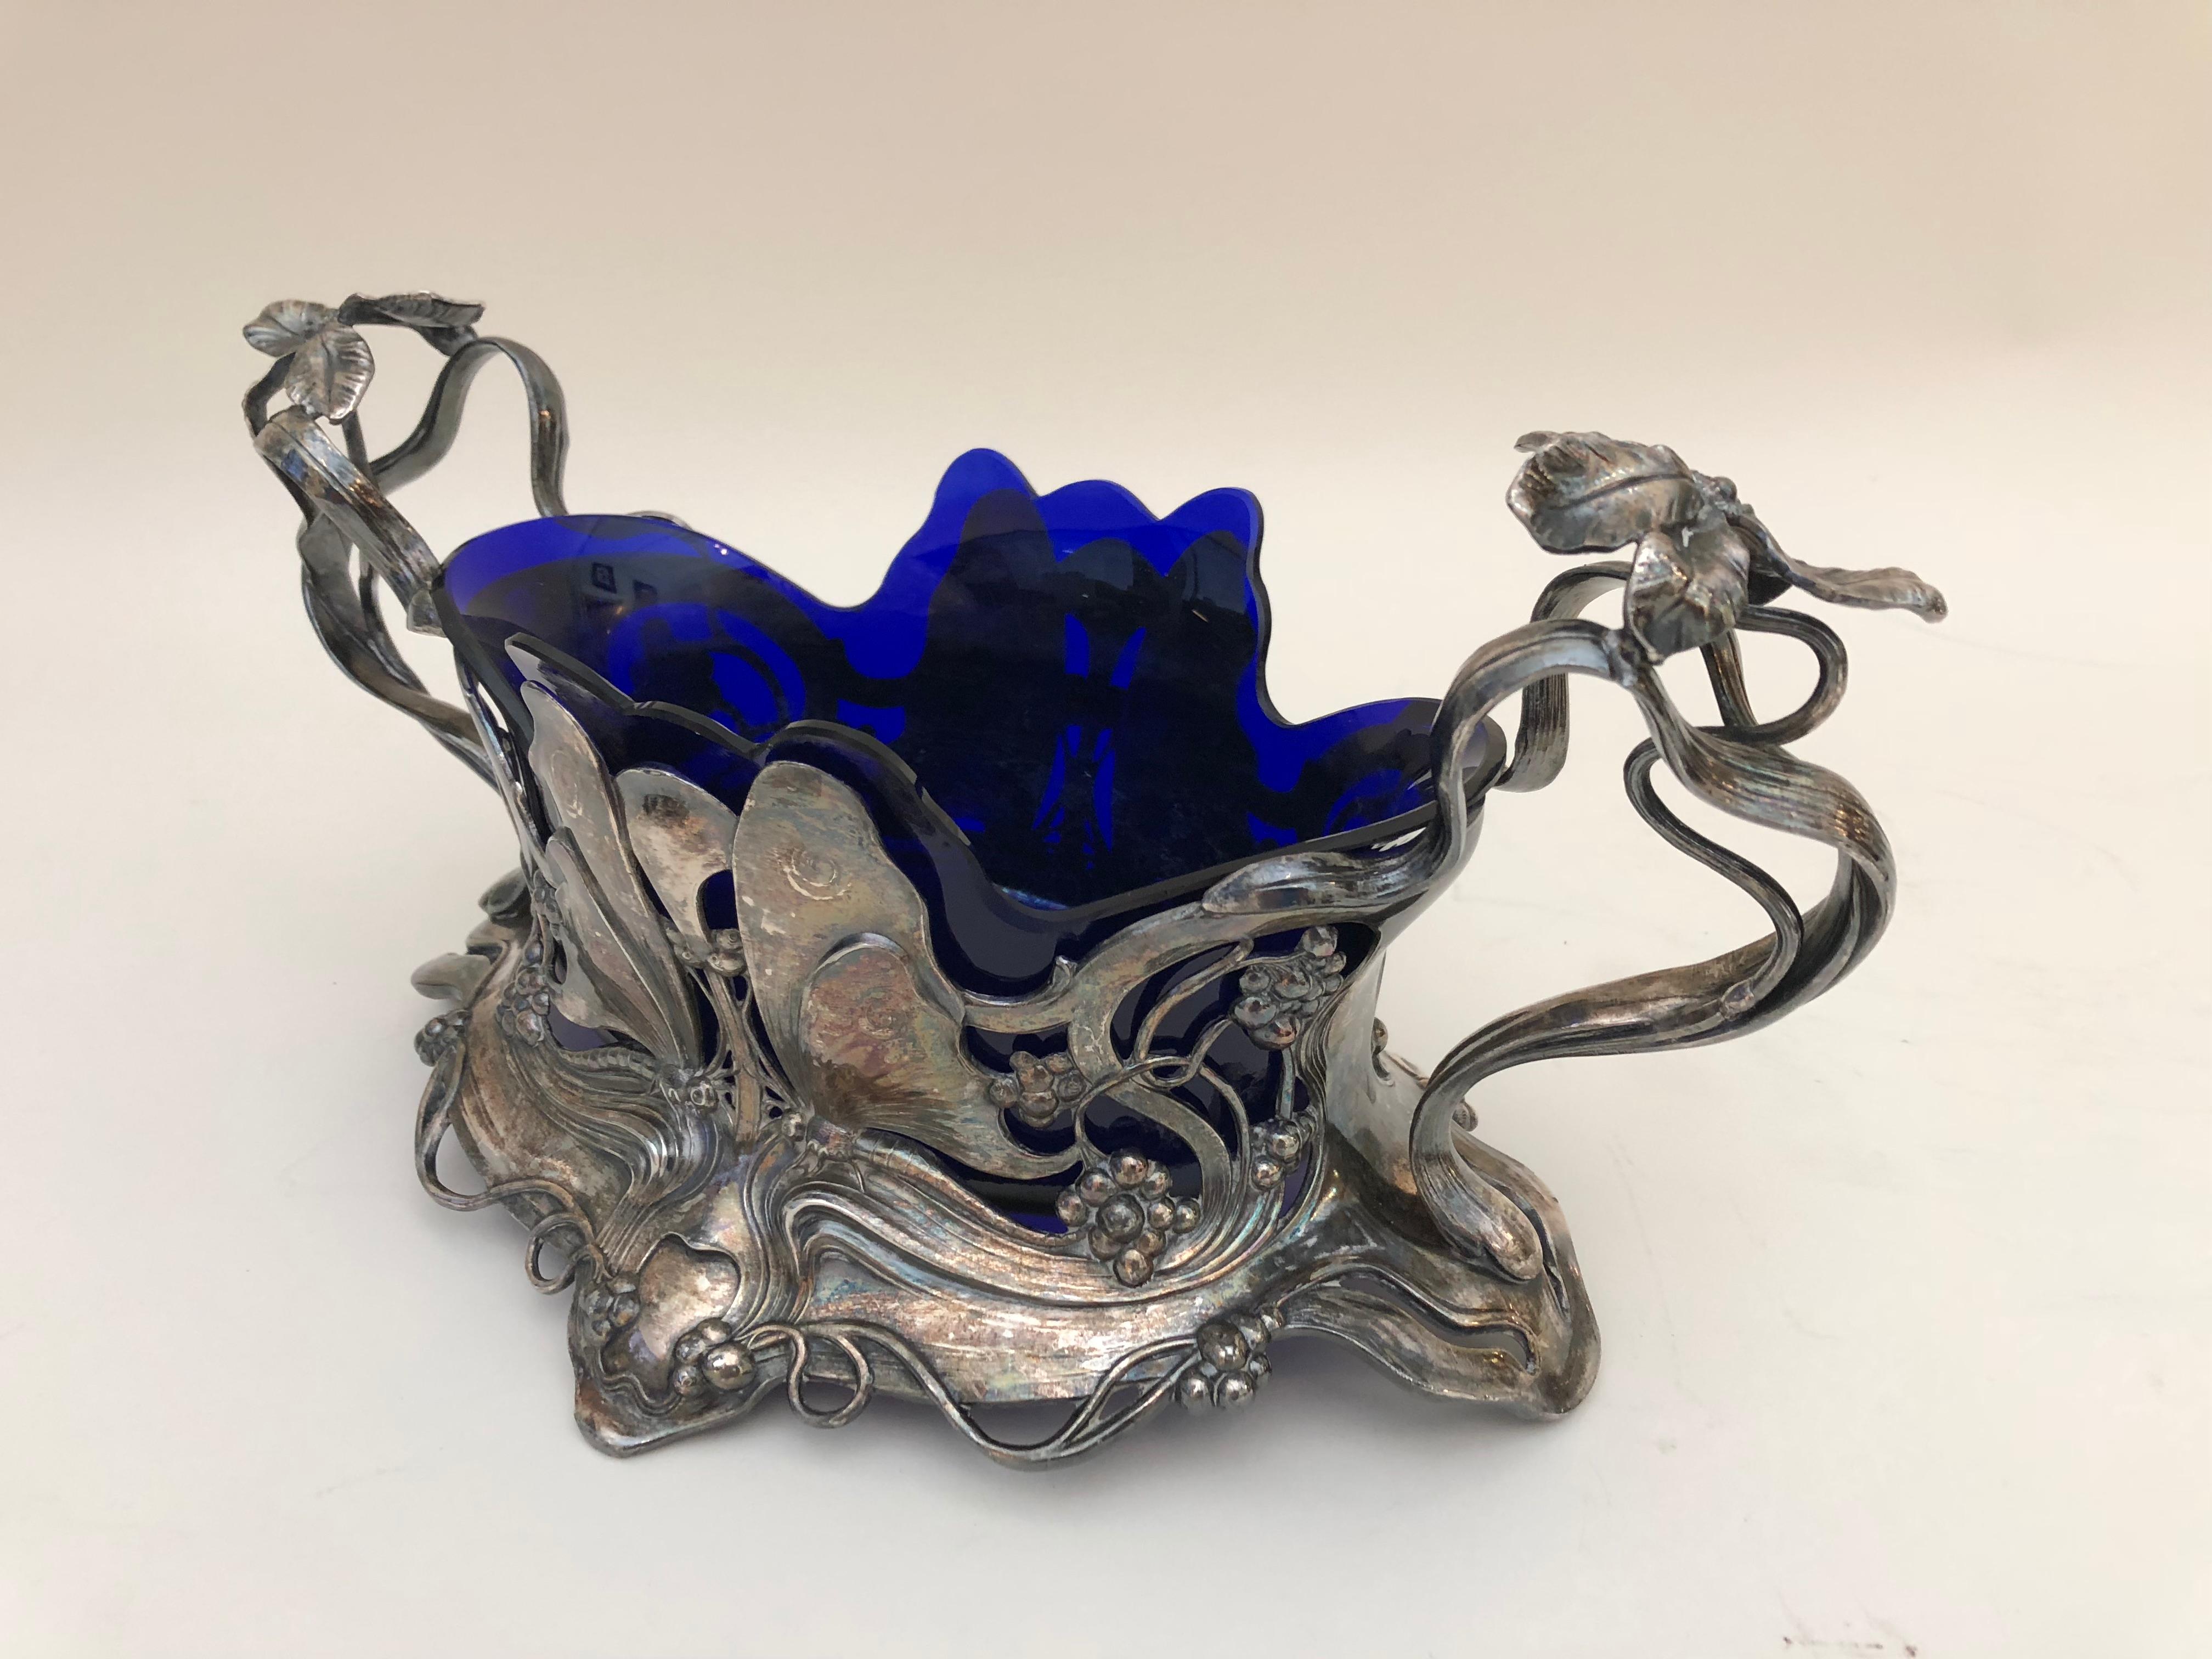 This ravishing Art Nouveau silver plated centrepiece is decorated with butterflies, flowers, and budding tendrils, and retains the original applied patina and cobalt-blue-glass liner. Designed by the German sculptor Albert Meyer, it bears the stamp